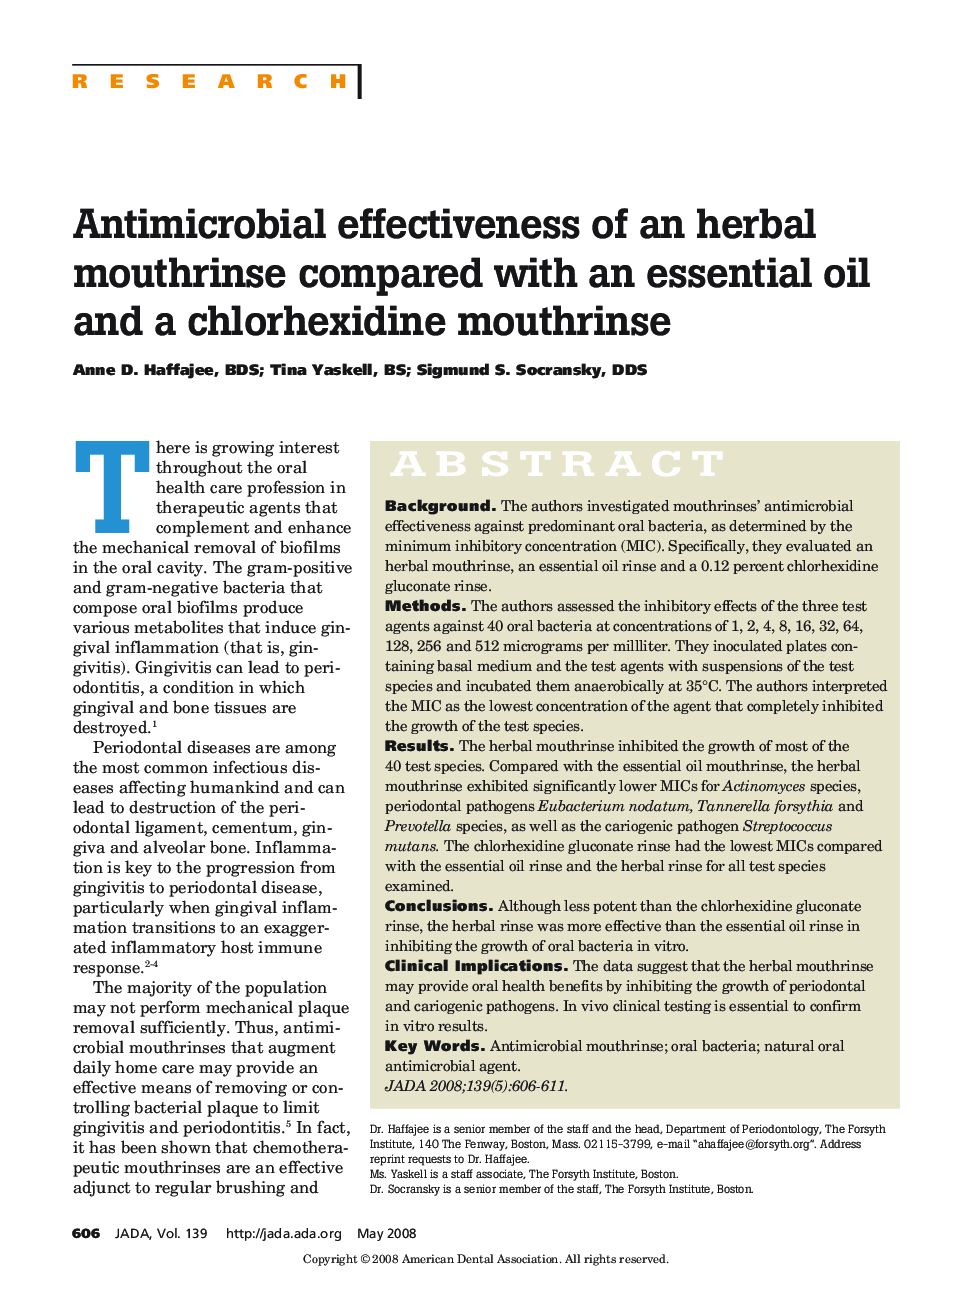 Antimicrobial Effectiveness of an Herbal Mouthrinse Compared With an Essential Oil and a Chlorhexidine Mouthrinse 